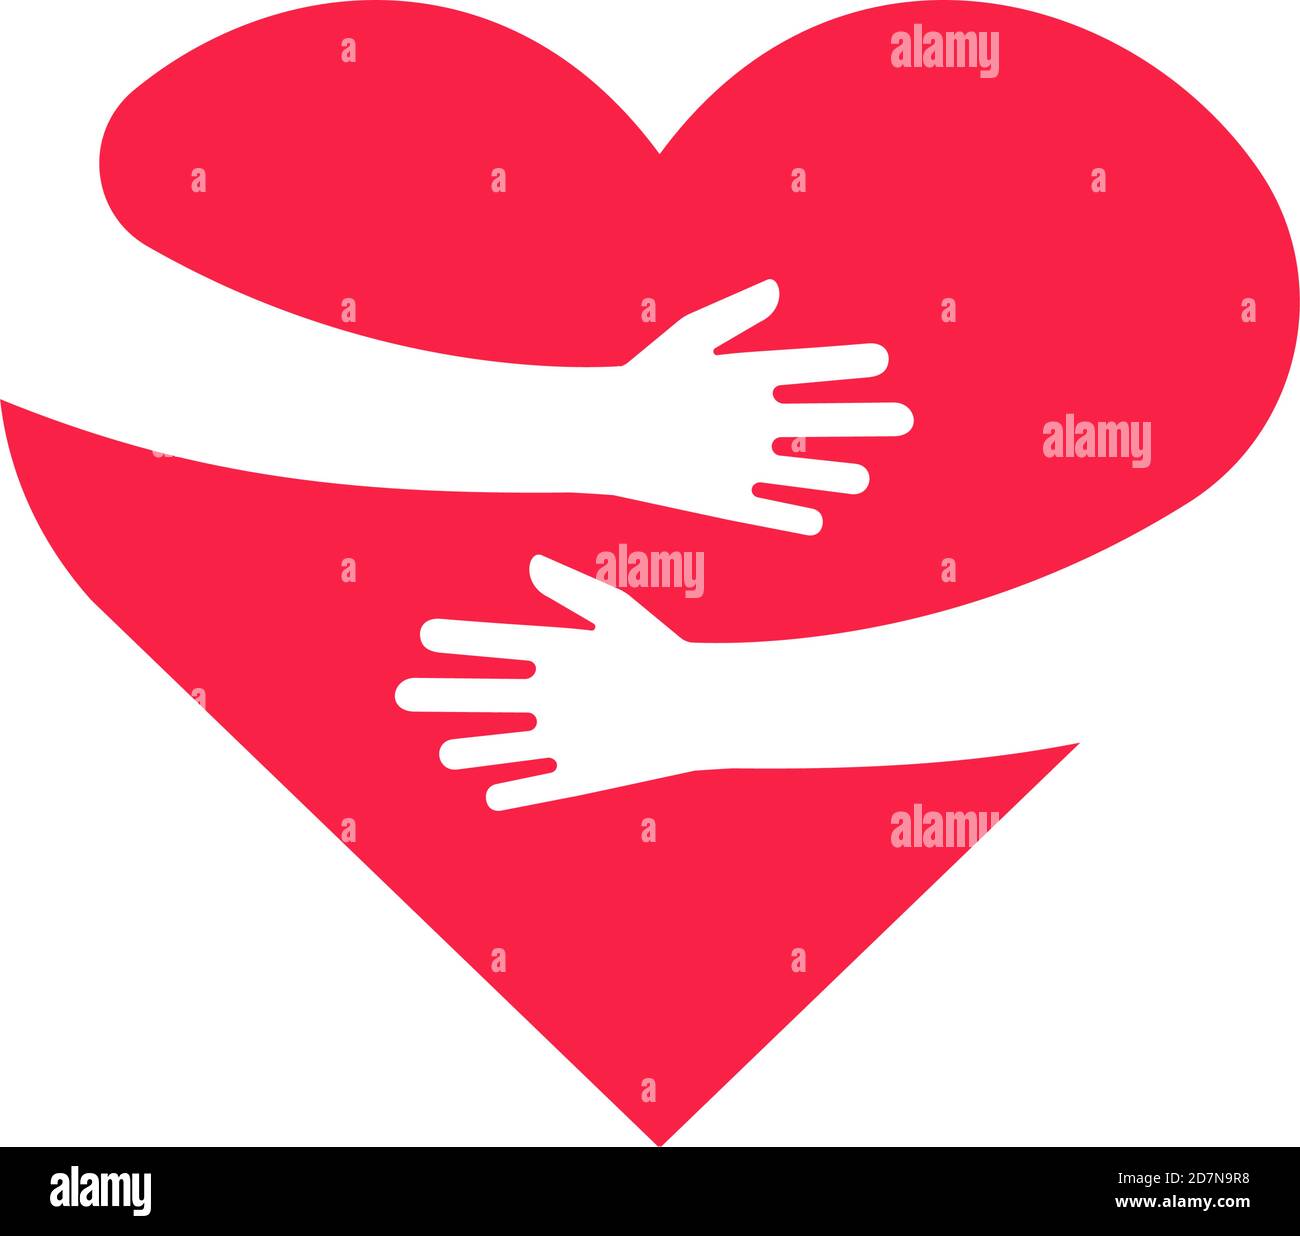 Hugging heart. Hands holding heart arm embrace love yourself child hope cardiology gift romance relationship vector isolated concept. Illustration of hugging and embrace red heart Stock Vector